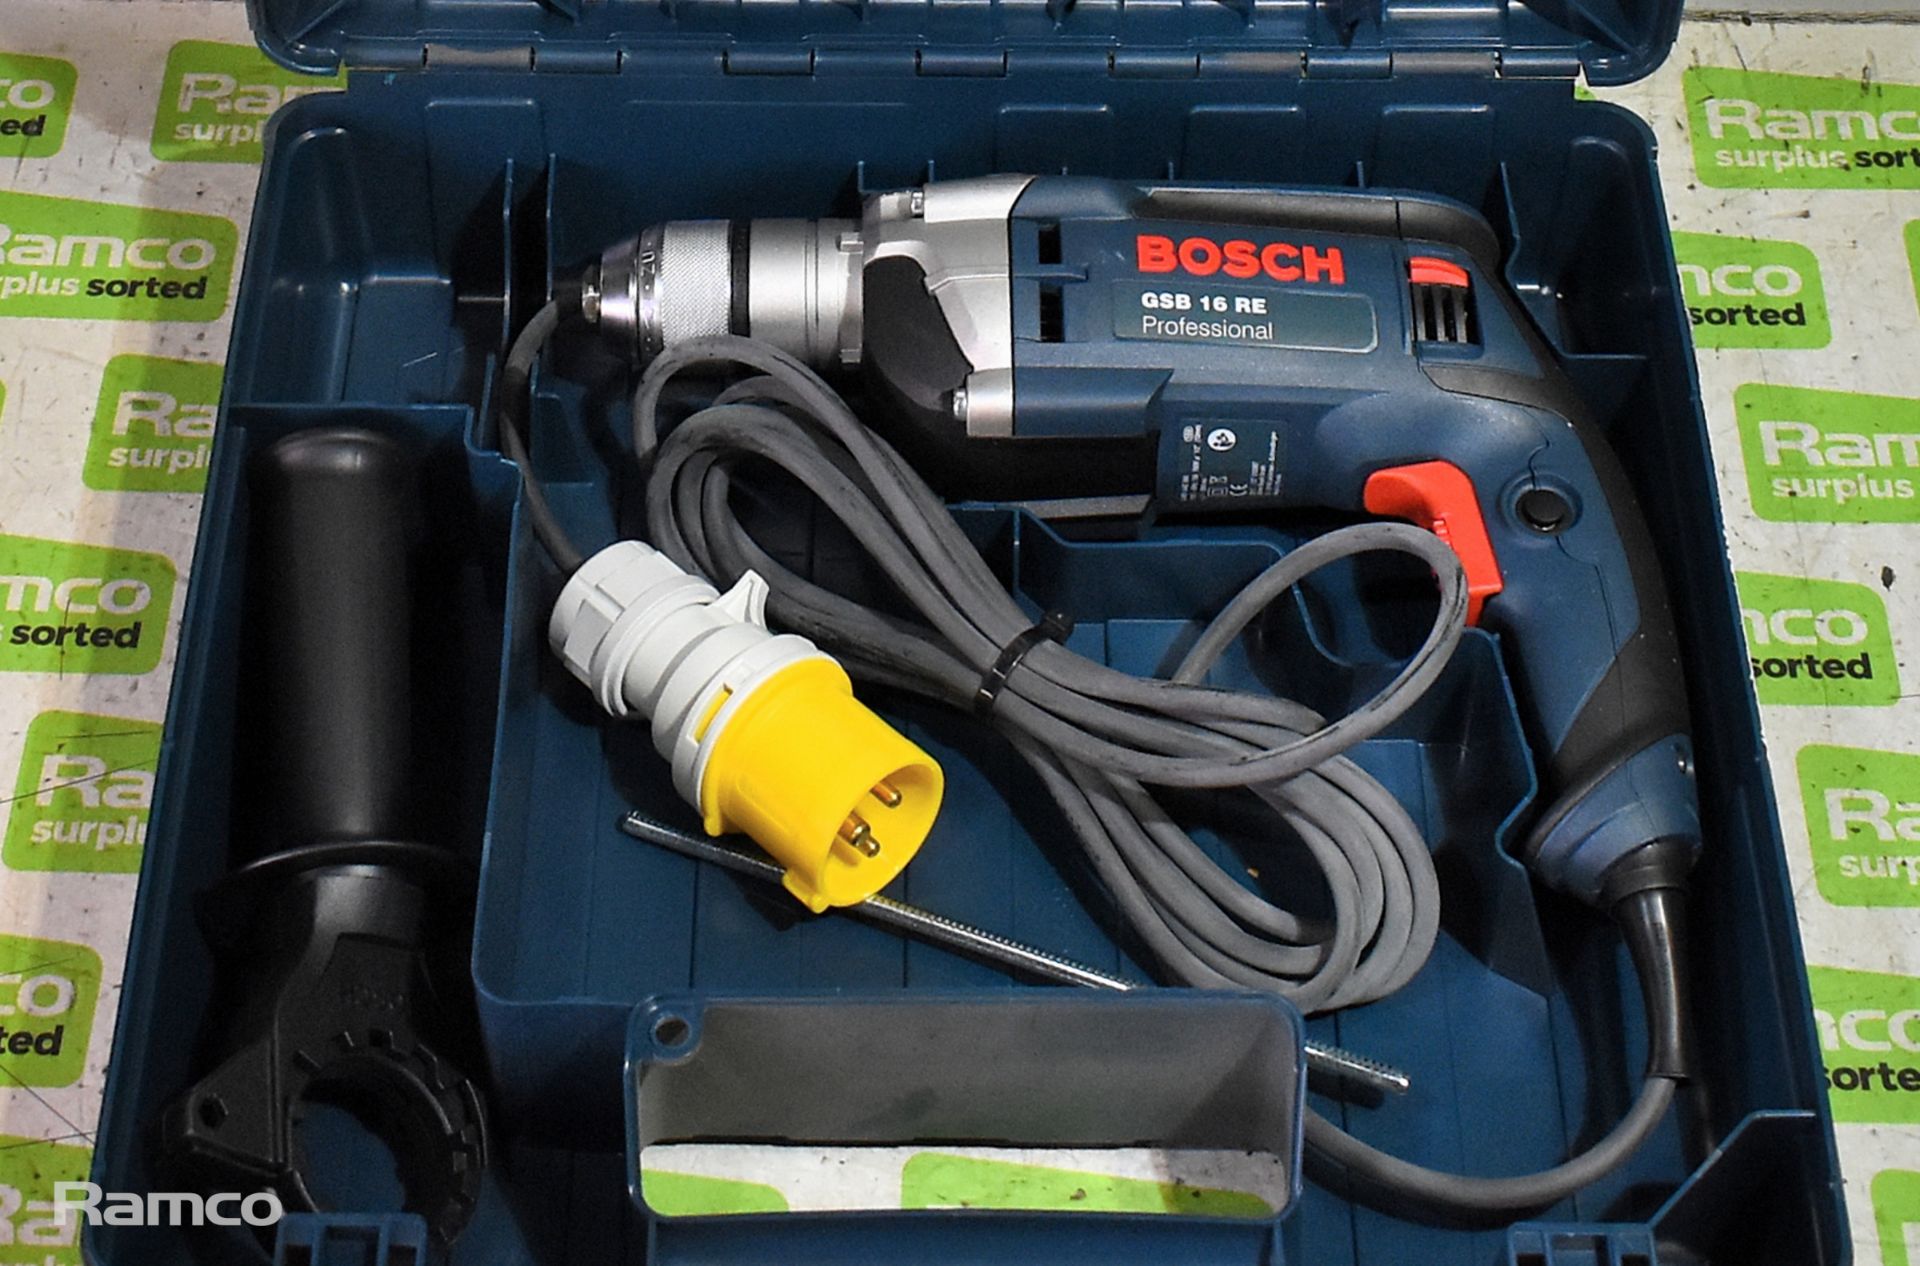 Bosch GSB 16 RE 110V electric drill with storage case - Image 2 of 6